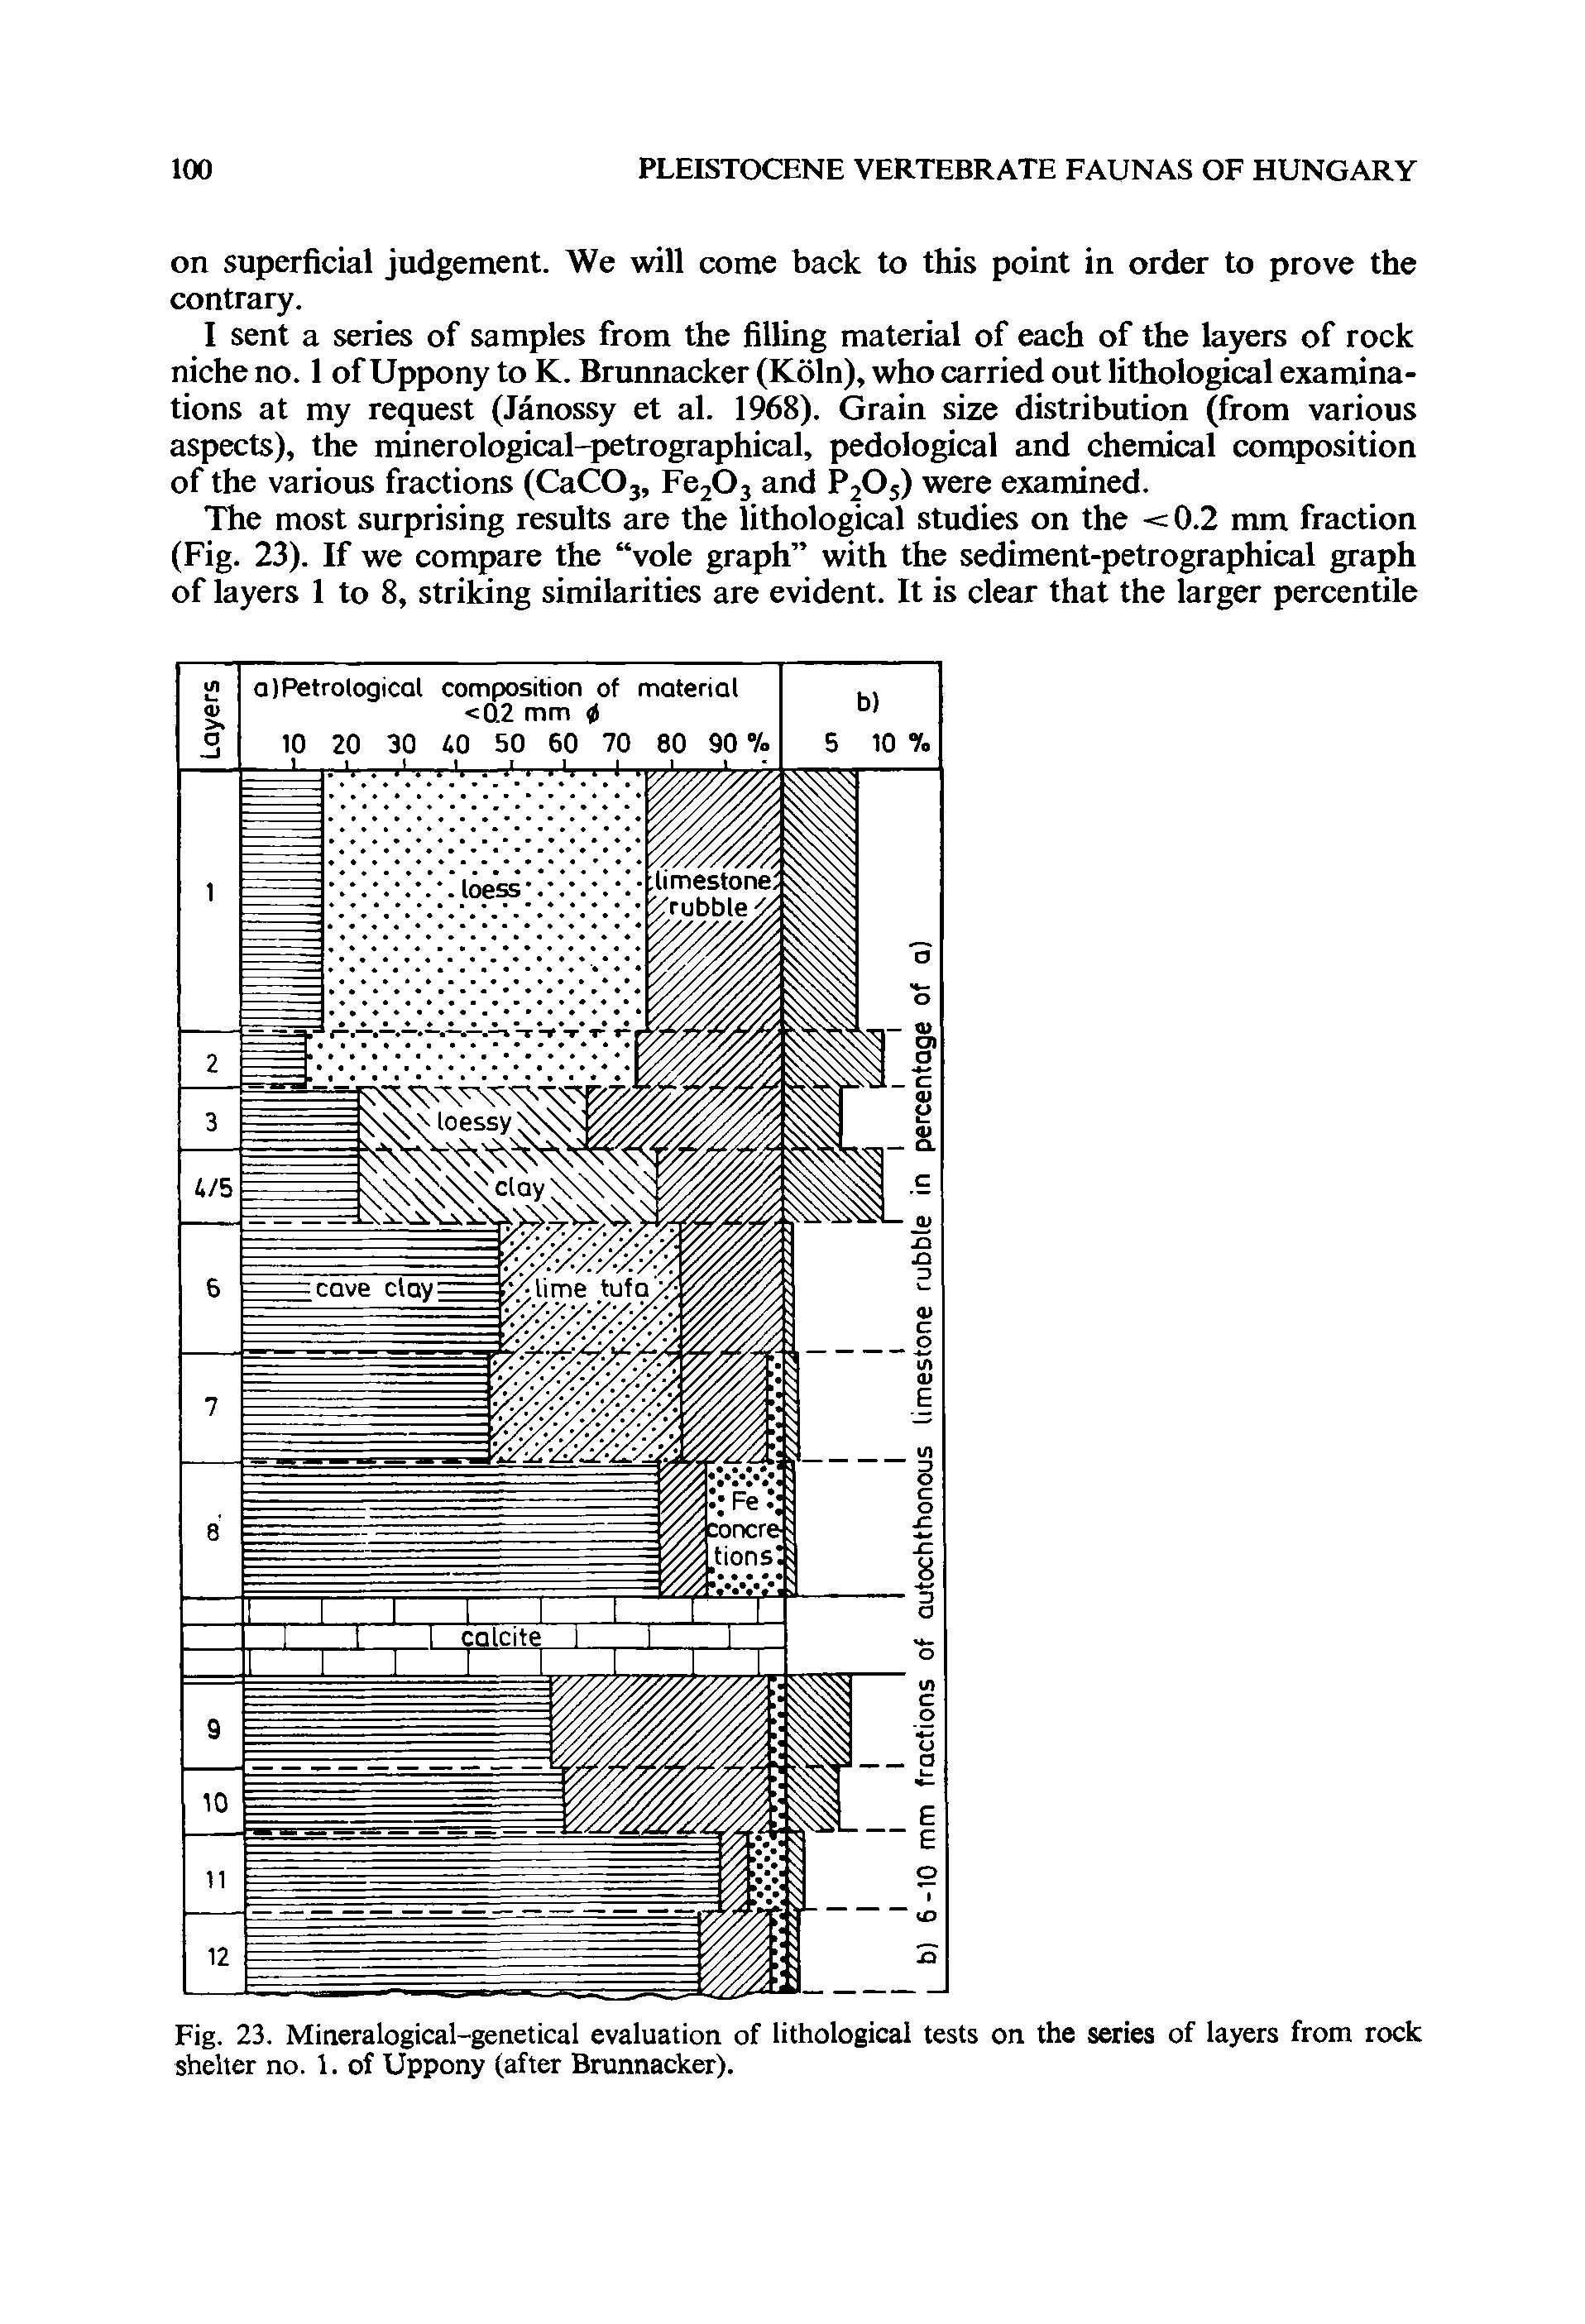 Fig. 23. Mineralogical-genetical evaluation of lithological tests on the series of layers from rock shelter no. 1. of Uppony (after Brunnacker).